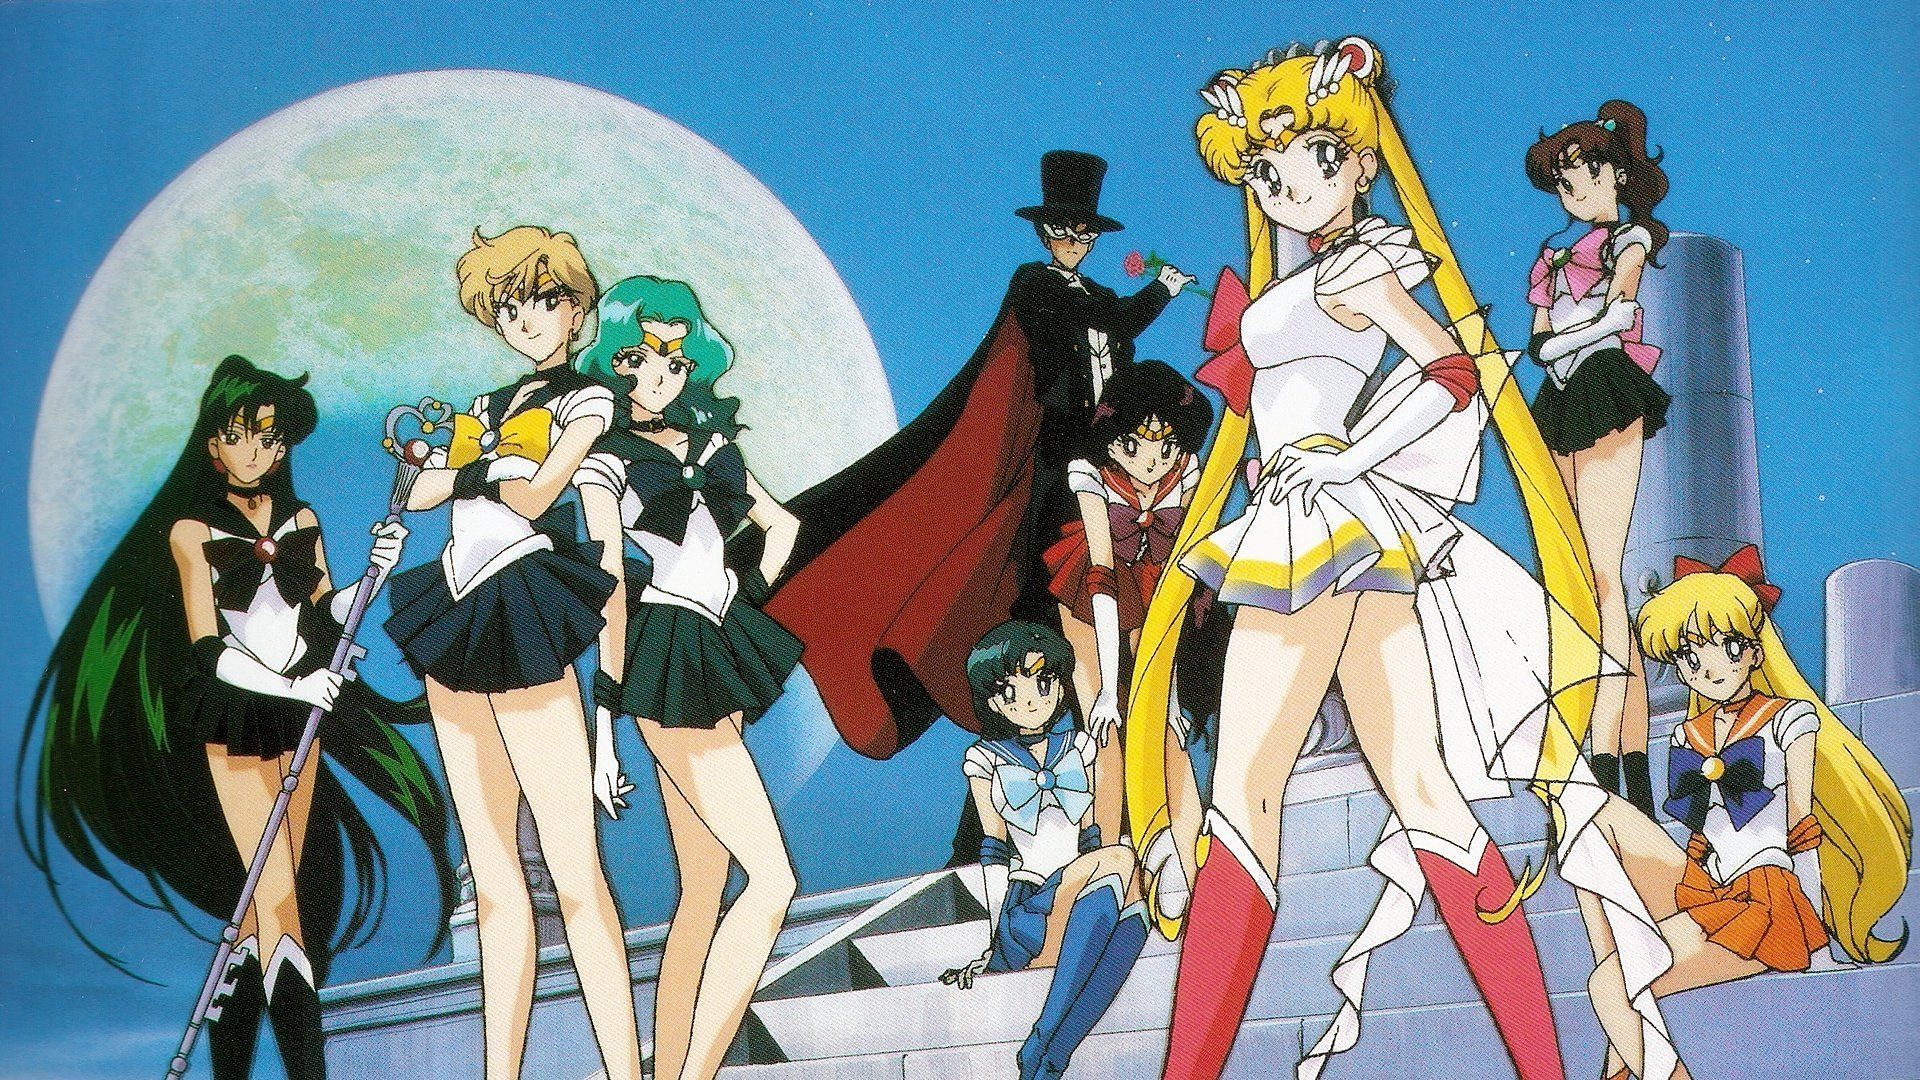 The cast of the Sailor Moon series as shown in anime (Image via Studio Toei Animation)